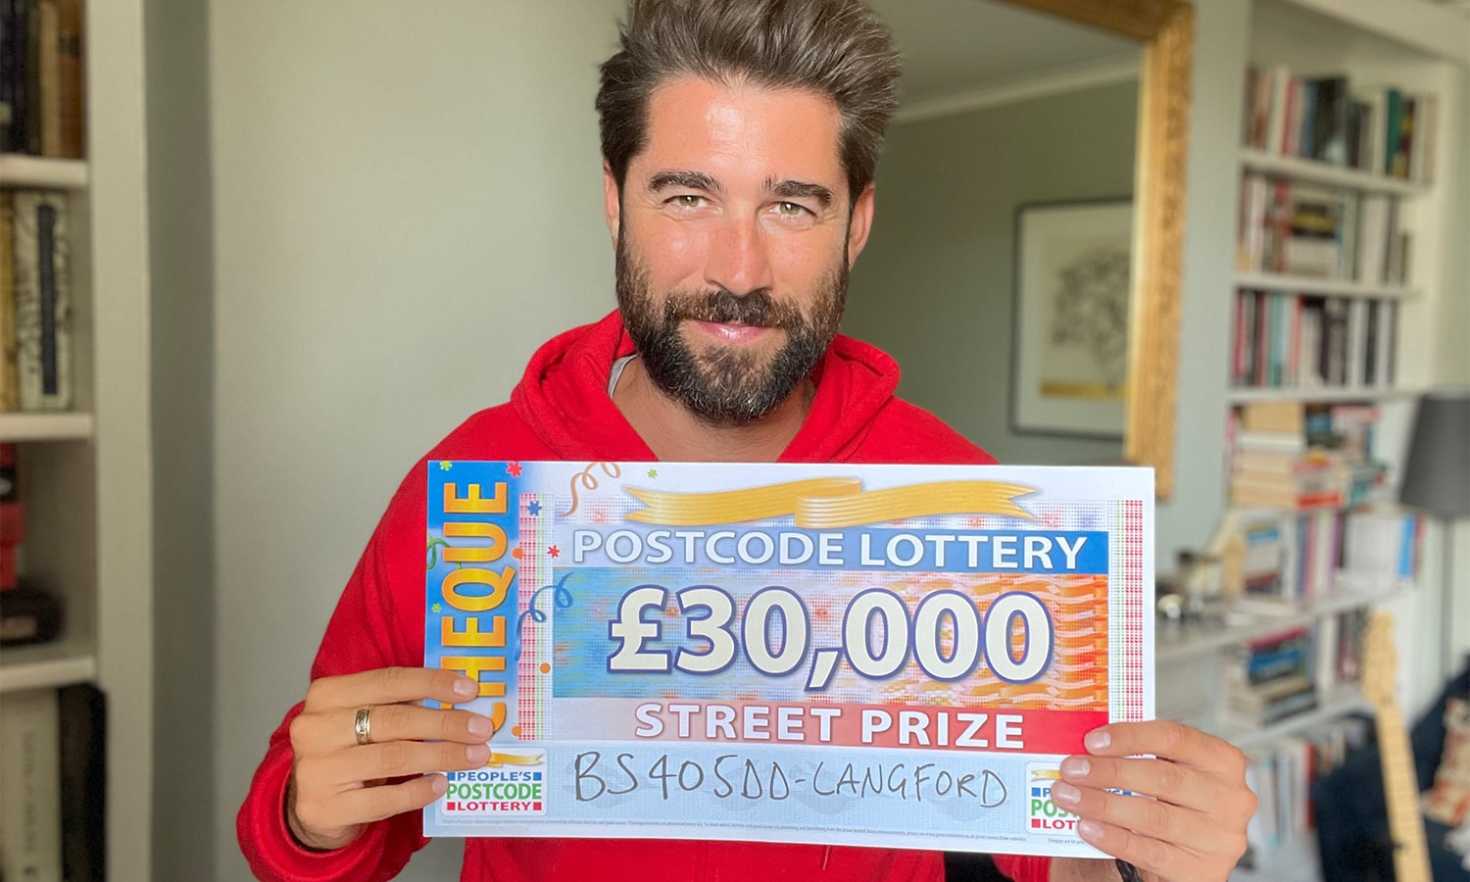 Today's £30,000 Street Prize is heading to a lucky couple in Langford